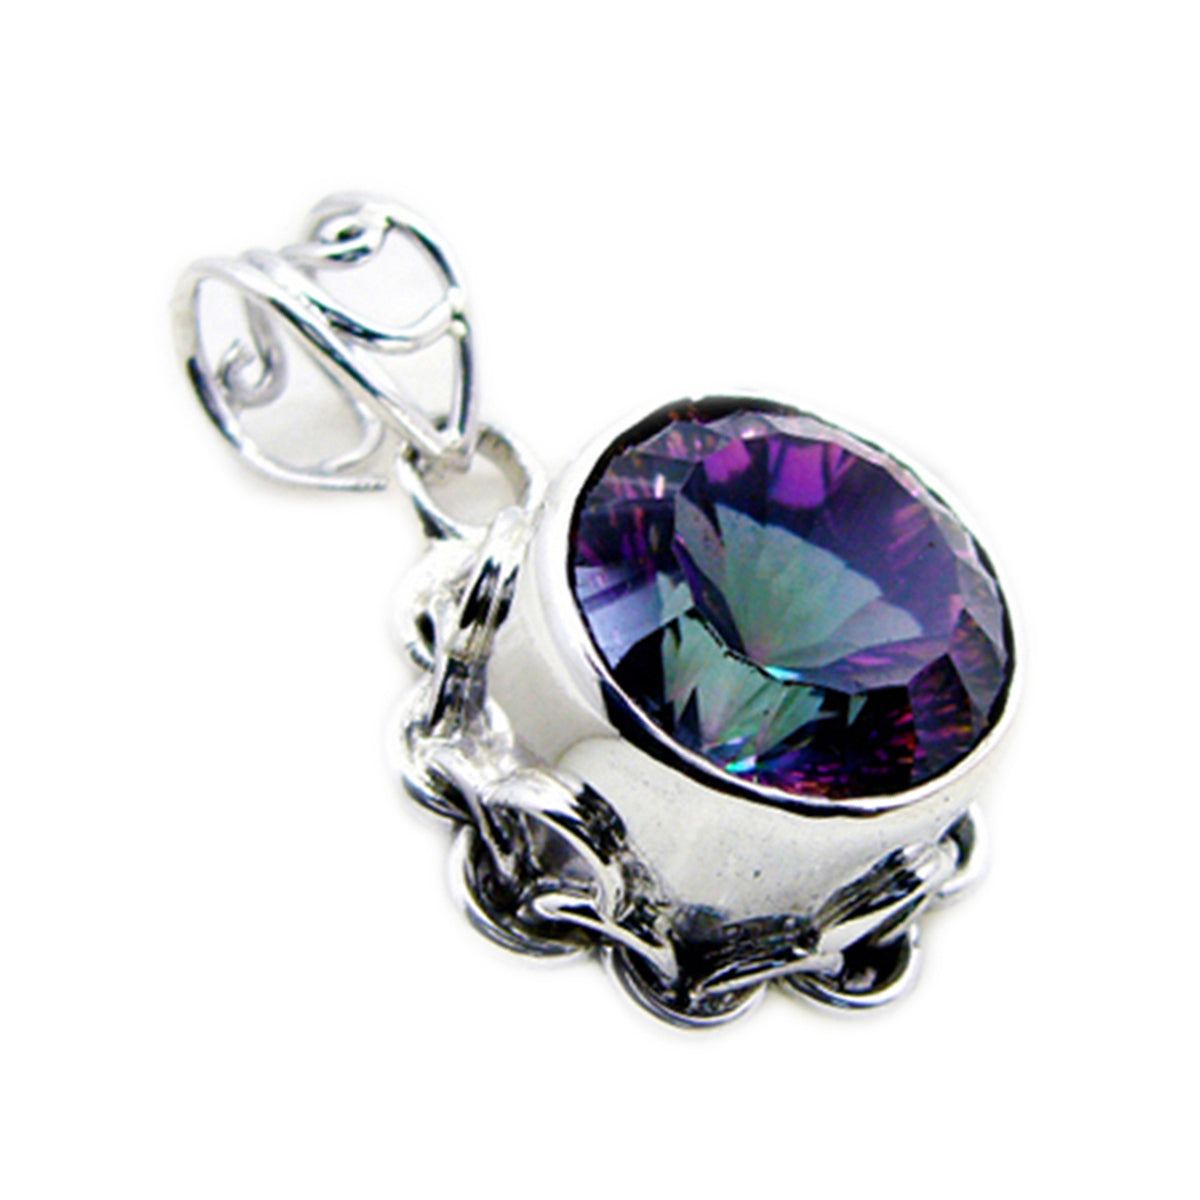 Riyo Beddable Gemstone Round Faceted Multi Color Mystic Quartz Sterling Silver Pendant Gift For Friend